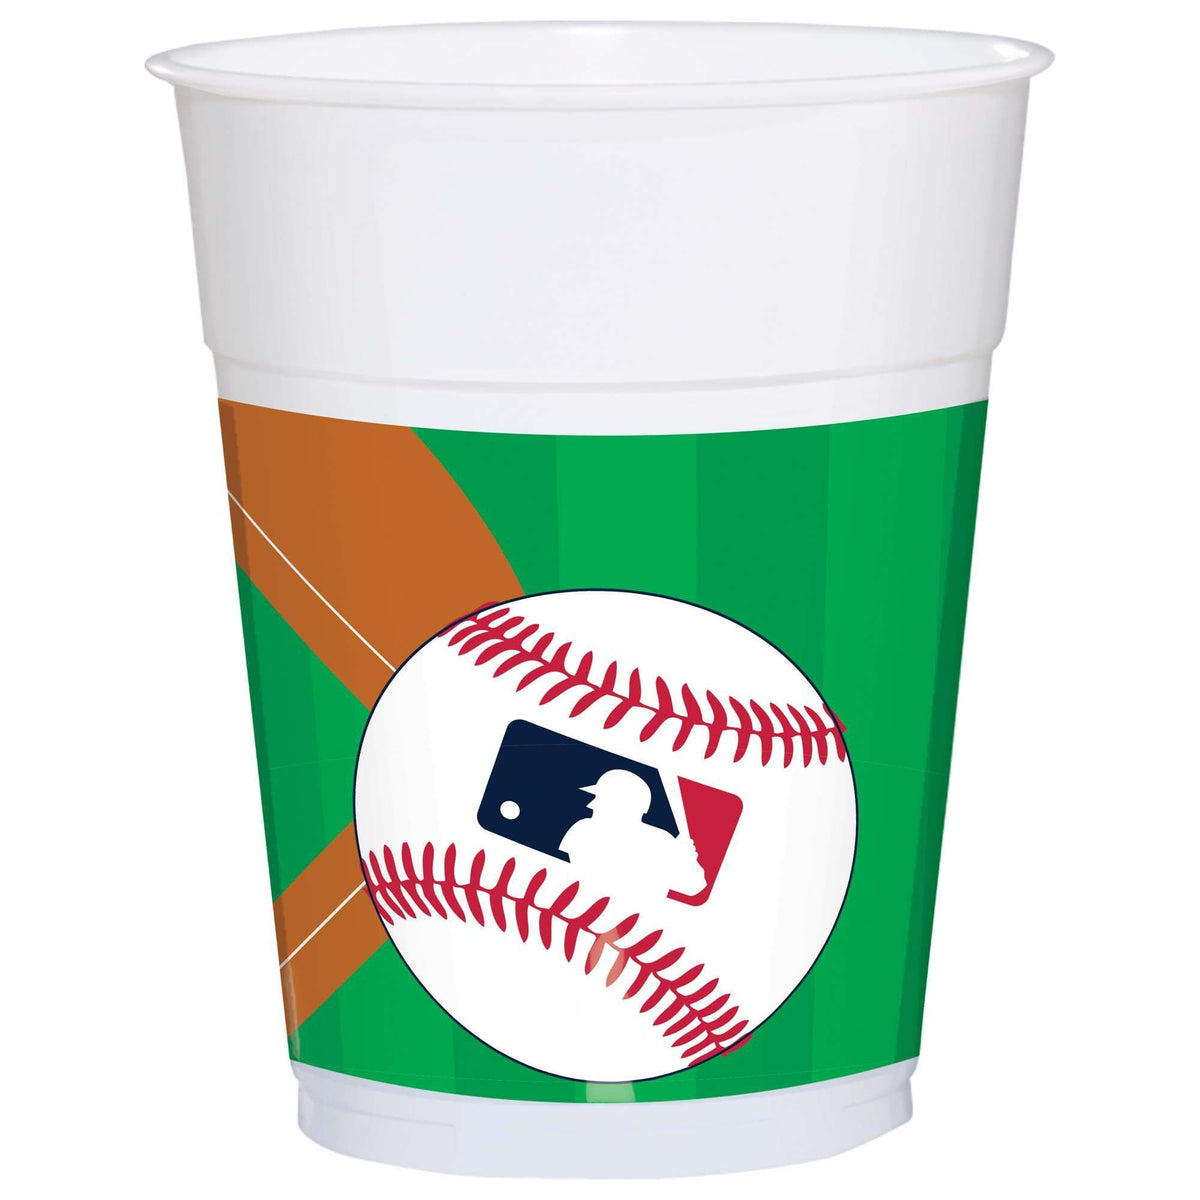 AMSCAN CA Theme Party Baseball White Party Favour Cups, 16 Oz, 25 Count